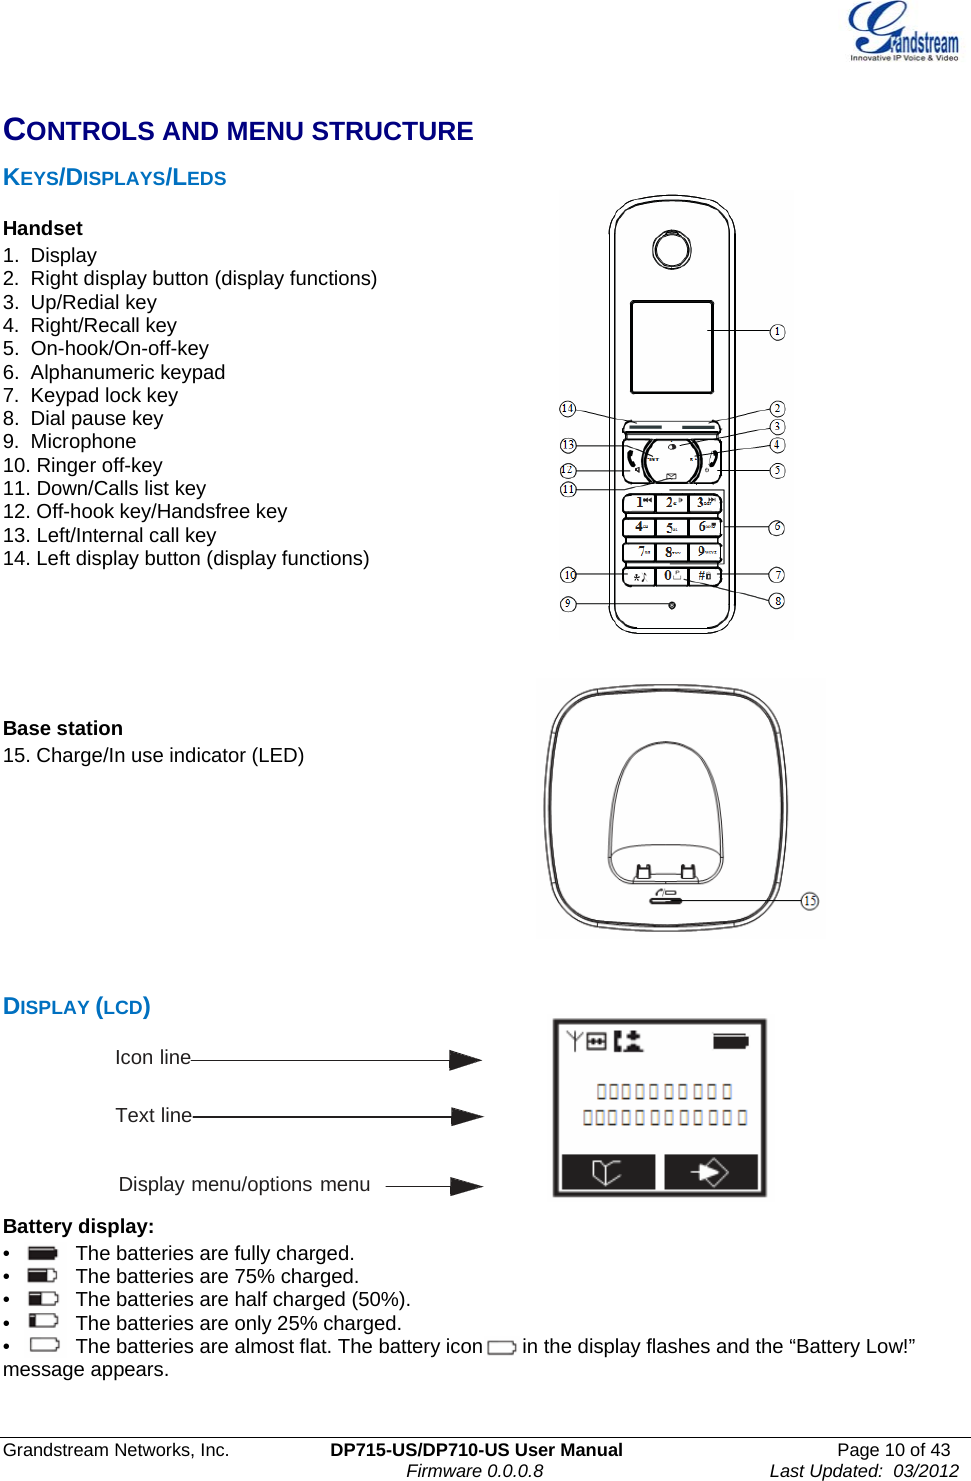  Grandstream Networks, Inc.  DP715-US/DP710-US User Manual  Page 10 of 43                                                                               Firmware 0.0.0.8                                     Last Updated:  03/2012 CONTROLS AND MENU STRUCTURE KEYS/DISPLAYS/LEDS Handset 1.  Display 2.  Right display button (display functions) 3.  Up/Redial key 4.  Right/Recall key 5.  On-hook/On-off-key 6.  Alphanumeric keypad 7.  Keypad lock key 8.  Dial pause key 9.  Microphone 10. Ringer off-key 11. Down/Calls list key    12. Off-hook key/Handsfree key 13. Left/Internal call key  14. Left display button (display functions)       Base station 15. Charge/In use indicator (LED)          DISPLAY (LCD)                    Icon line                   Text line                      Display menu/options menu   Battery display: •   The batteries are fully charged. •   The batteries are 75% charged. •   The batteries are half charged (50%). •   The batteries are only 25% charged. •   The batteries are almost flat. The battery icon       in the display flashes and the “Battery Low!” message appears.  